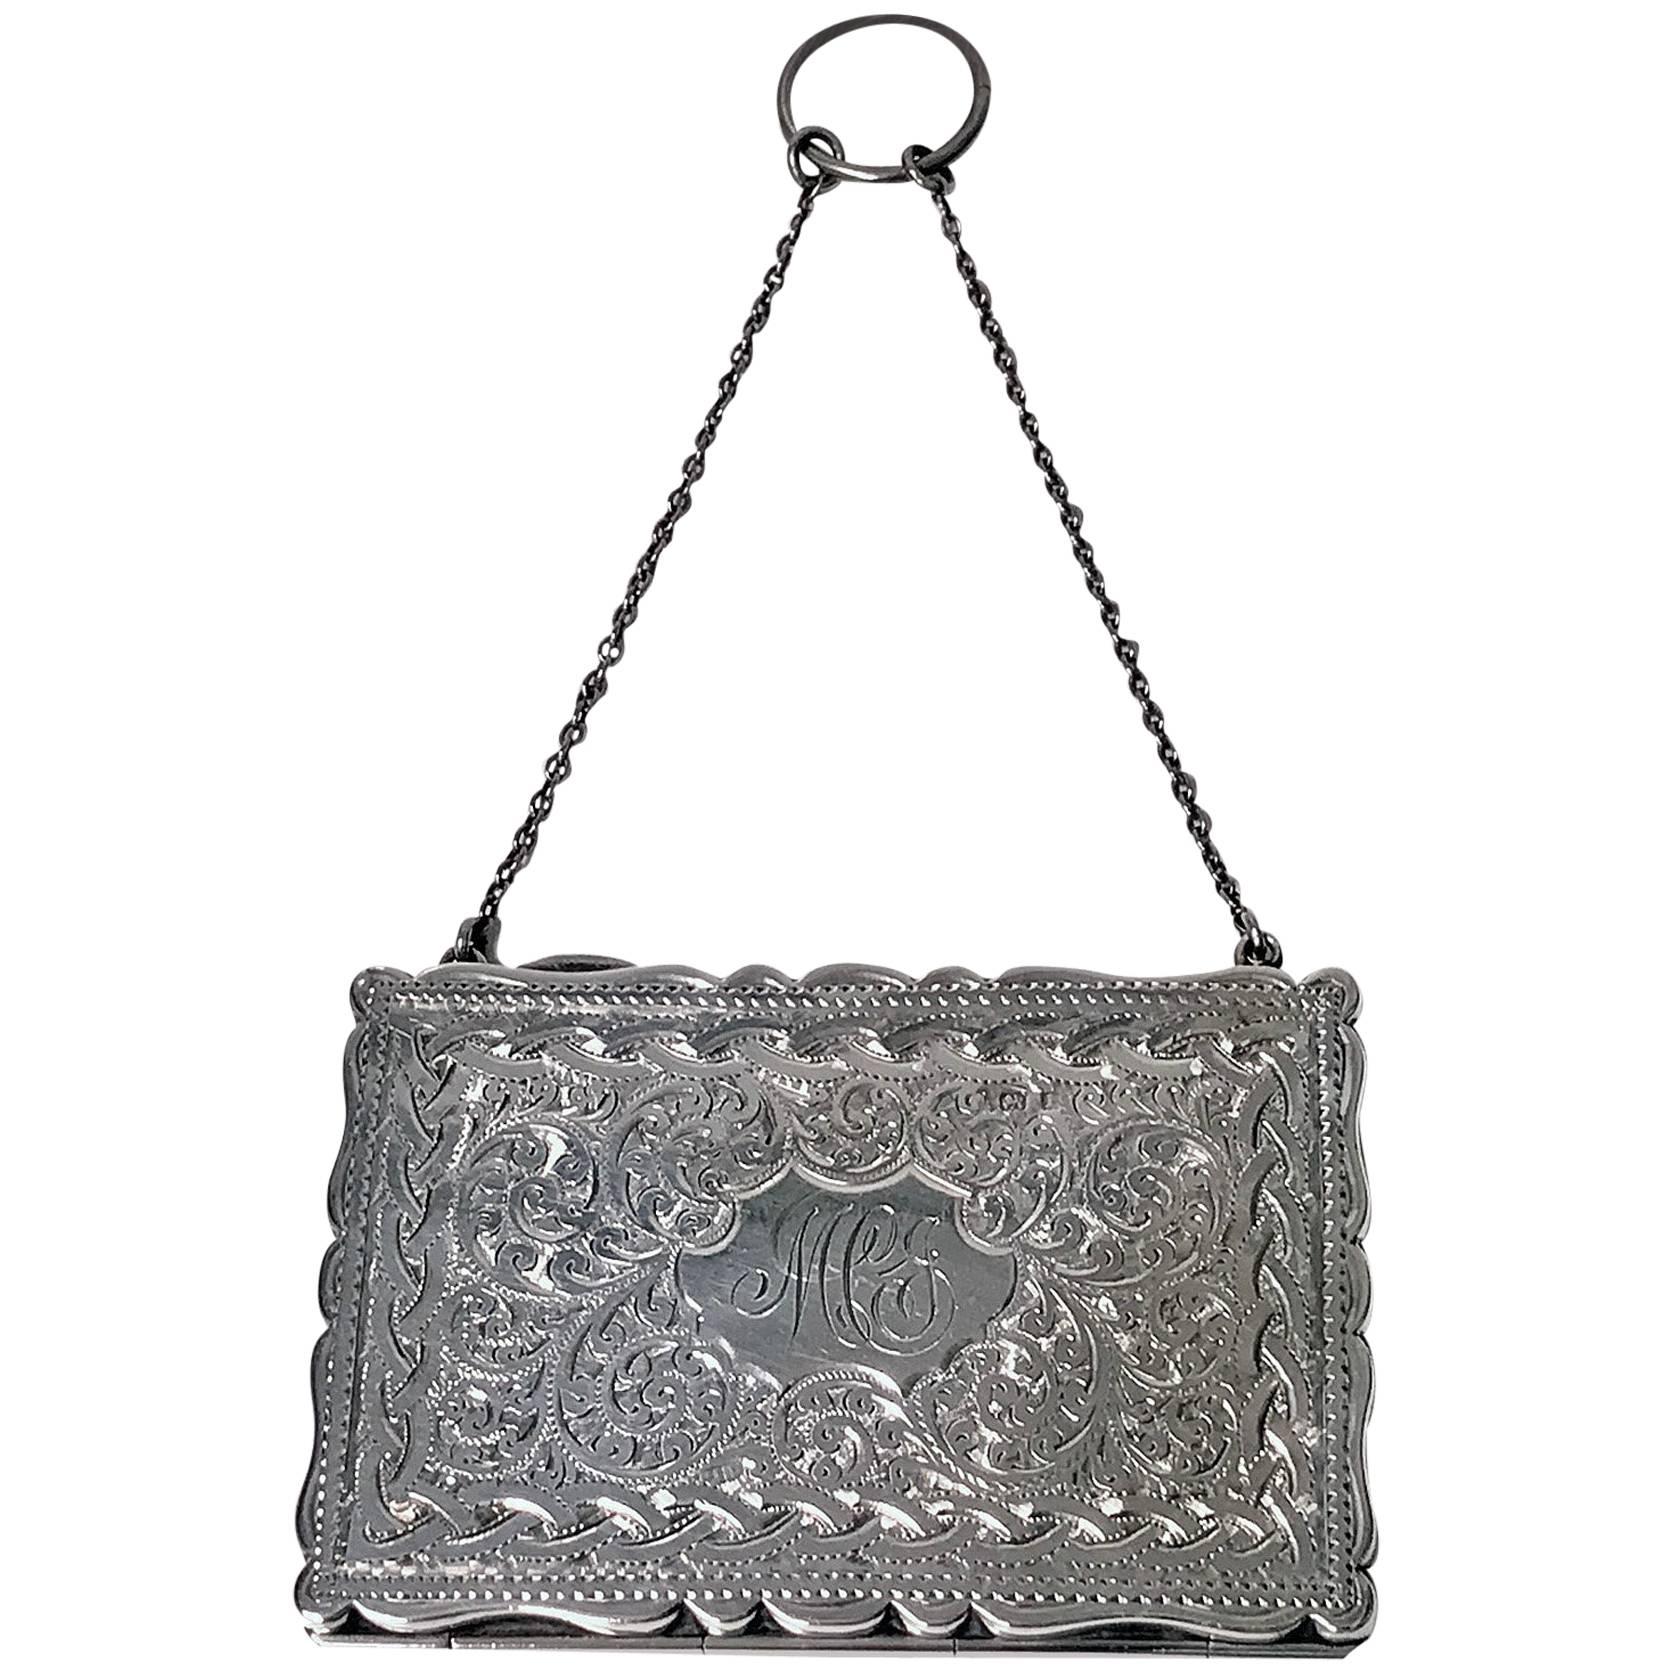 Blackenton Sterling Silver Purses for sale at auction on 21st January |  Bidsquare